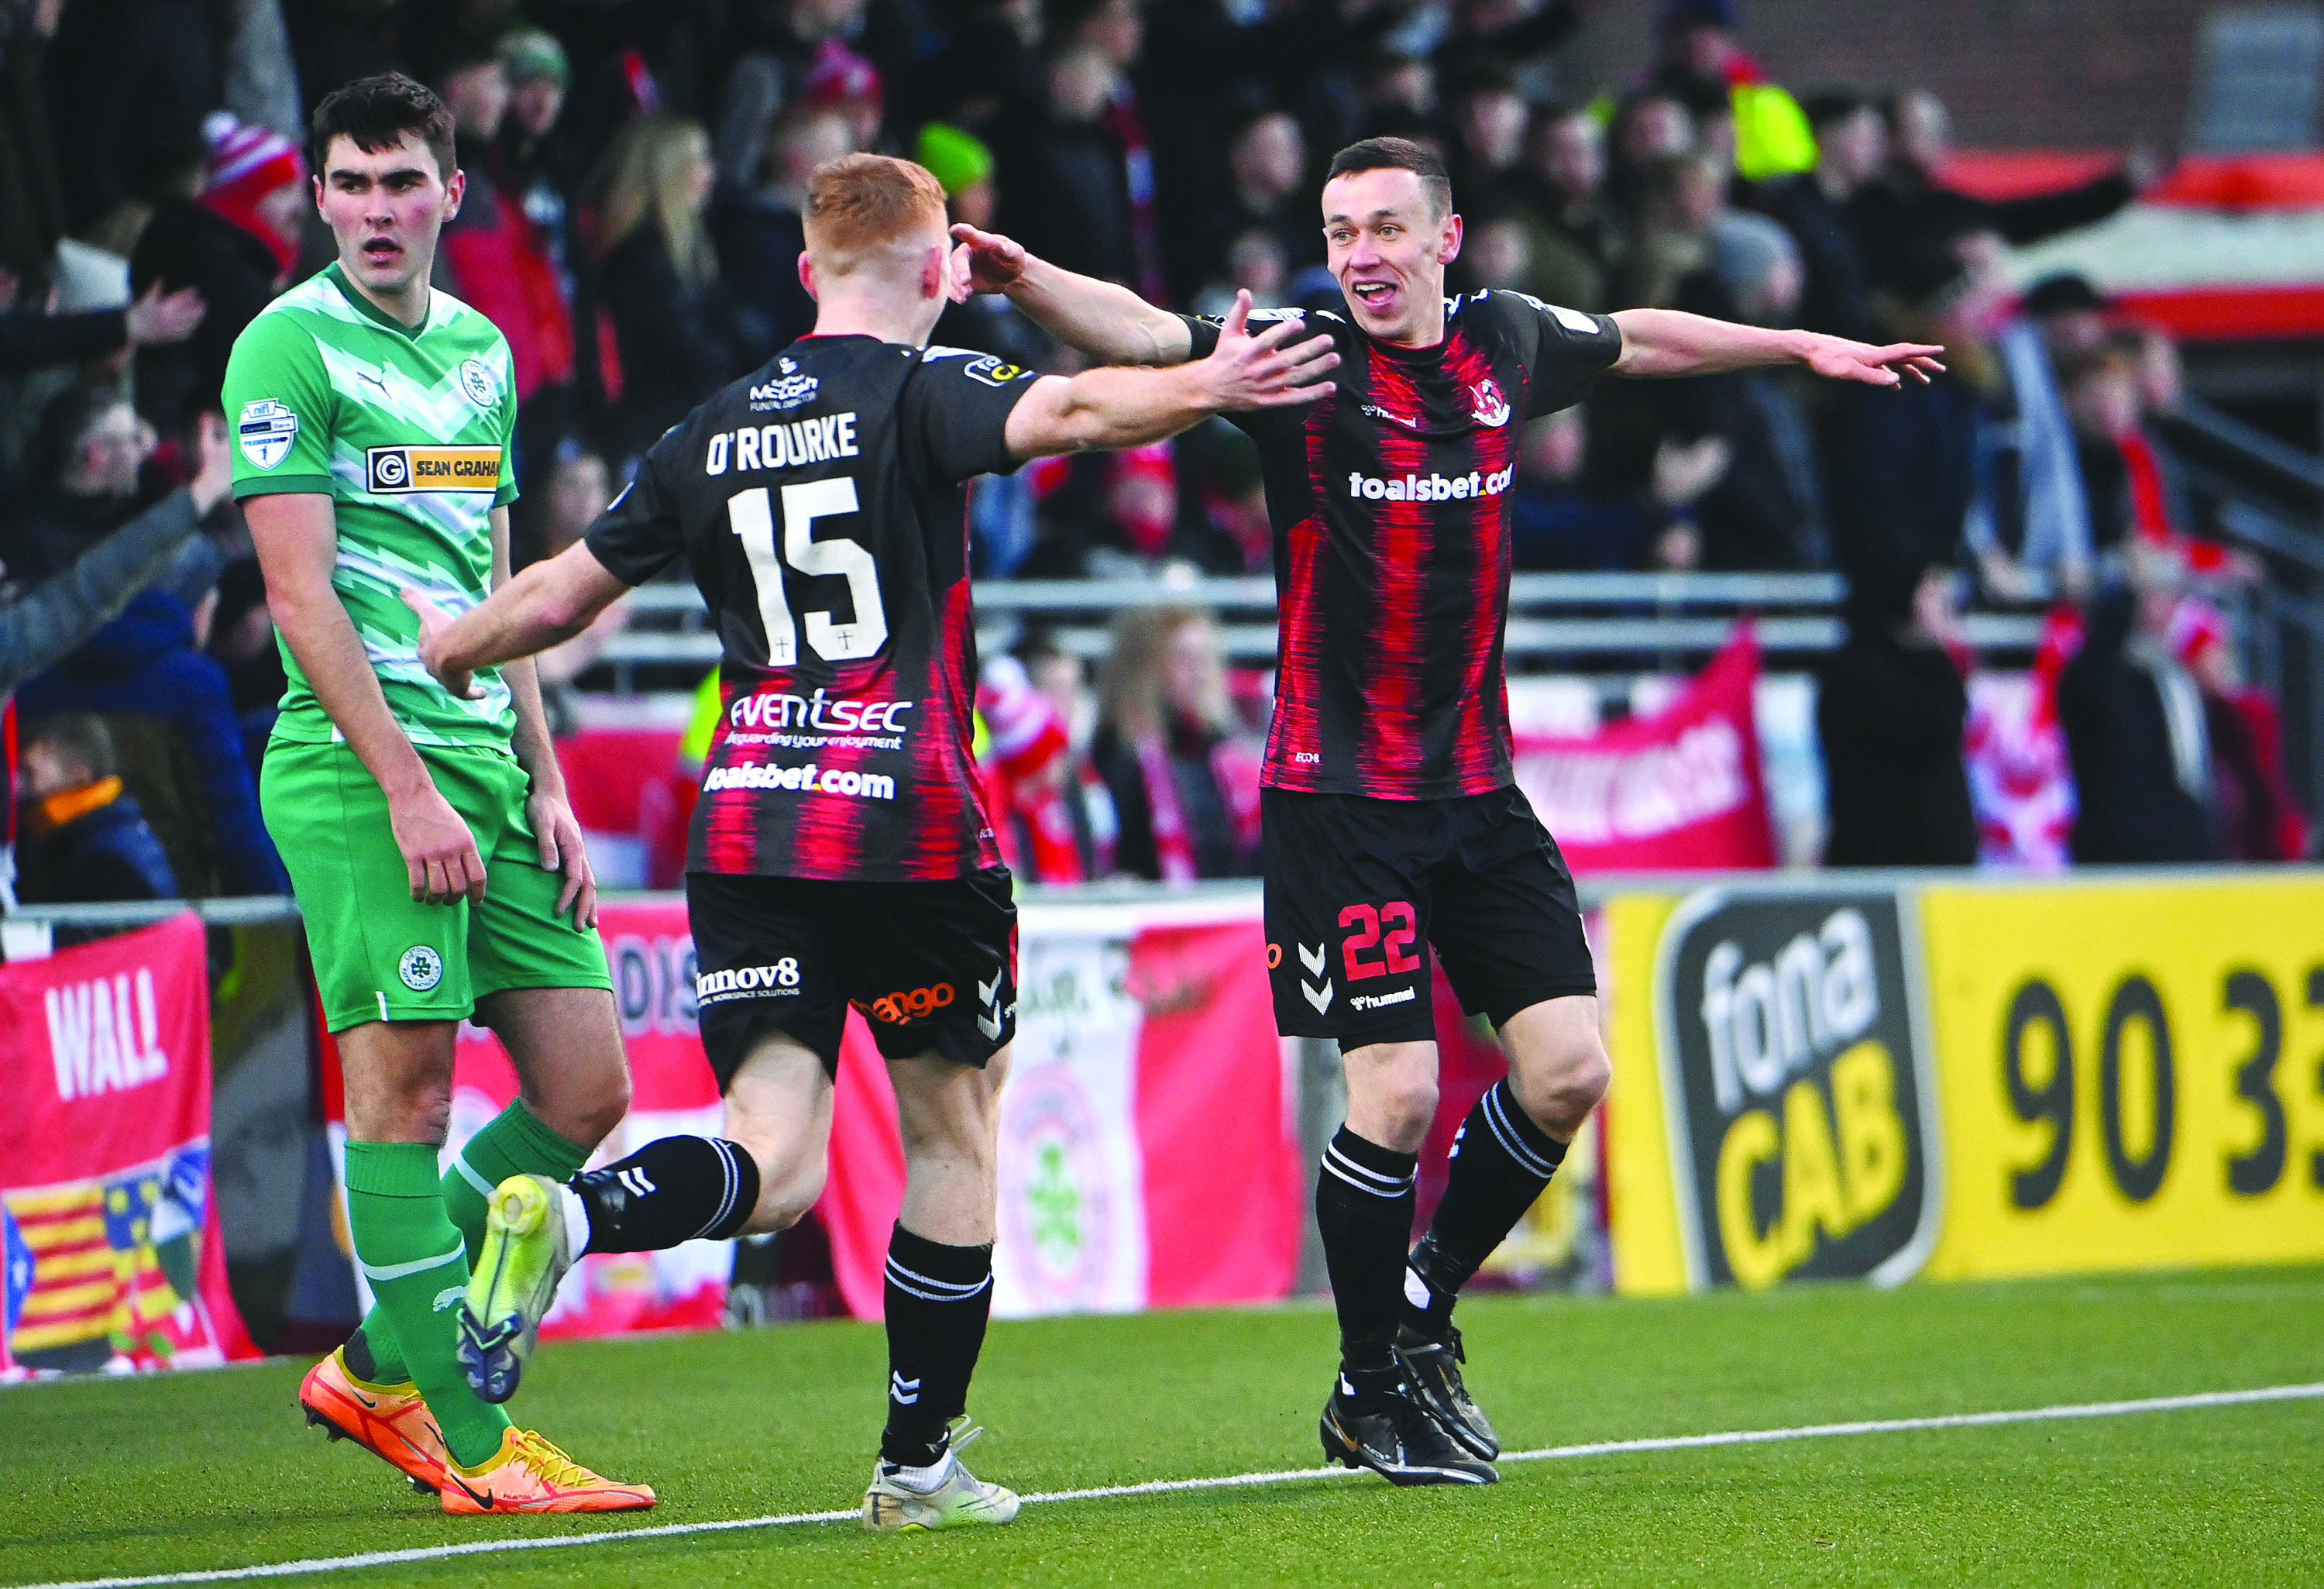 Crusaders were 3-0 winners over Cliftonville at Seaview on St Stephen’s Day with Paul Heatley on the scoresheet  